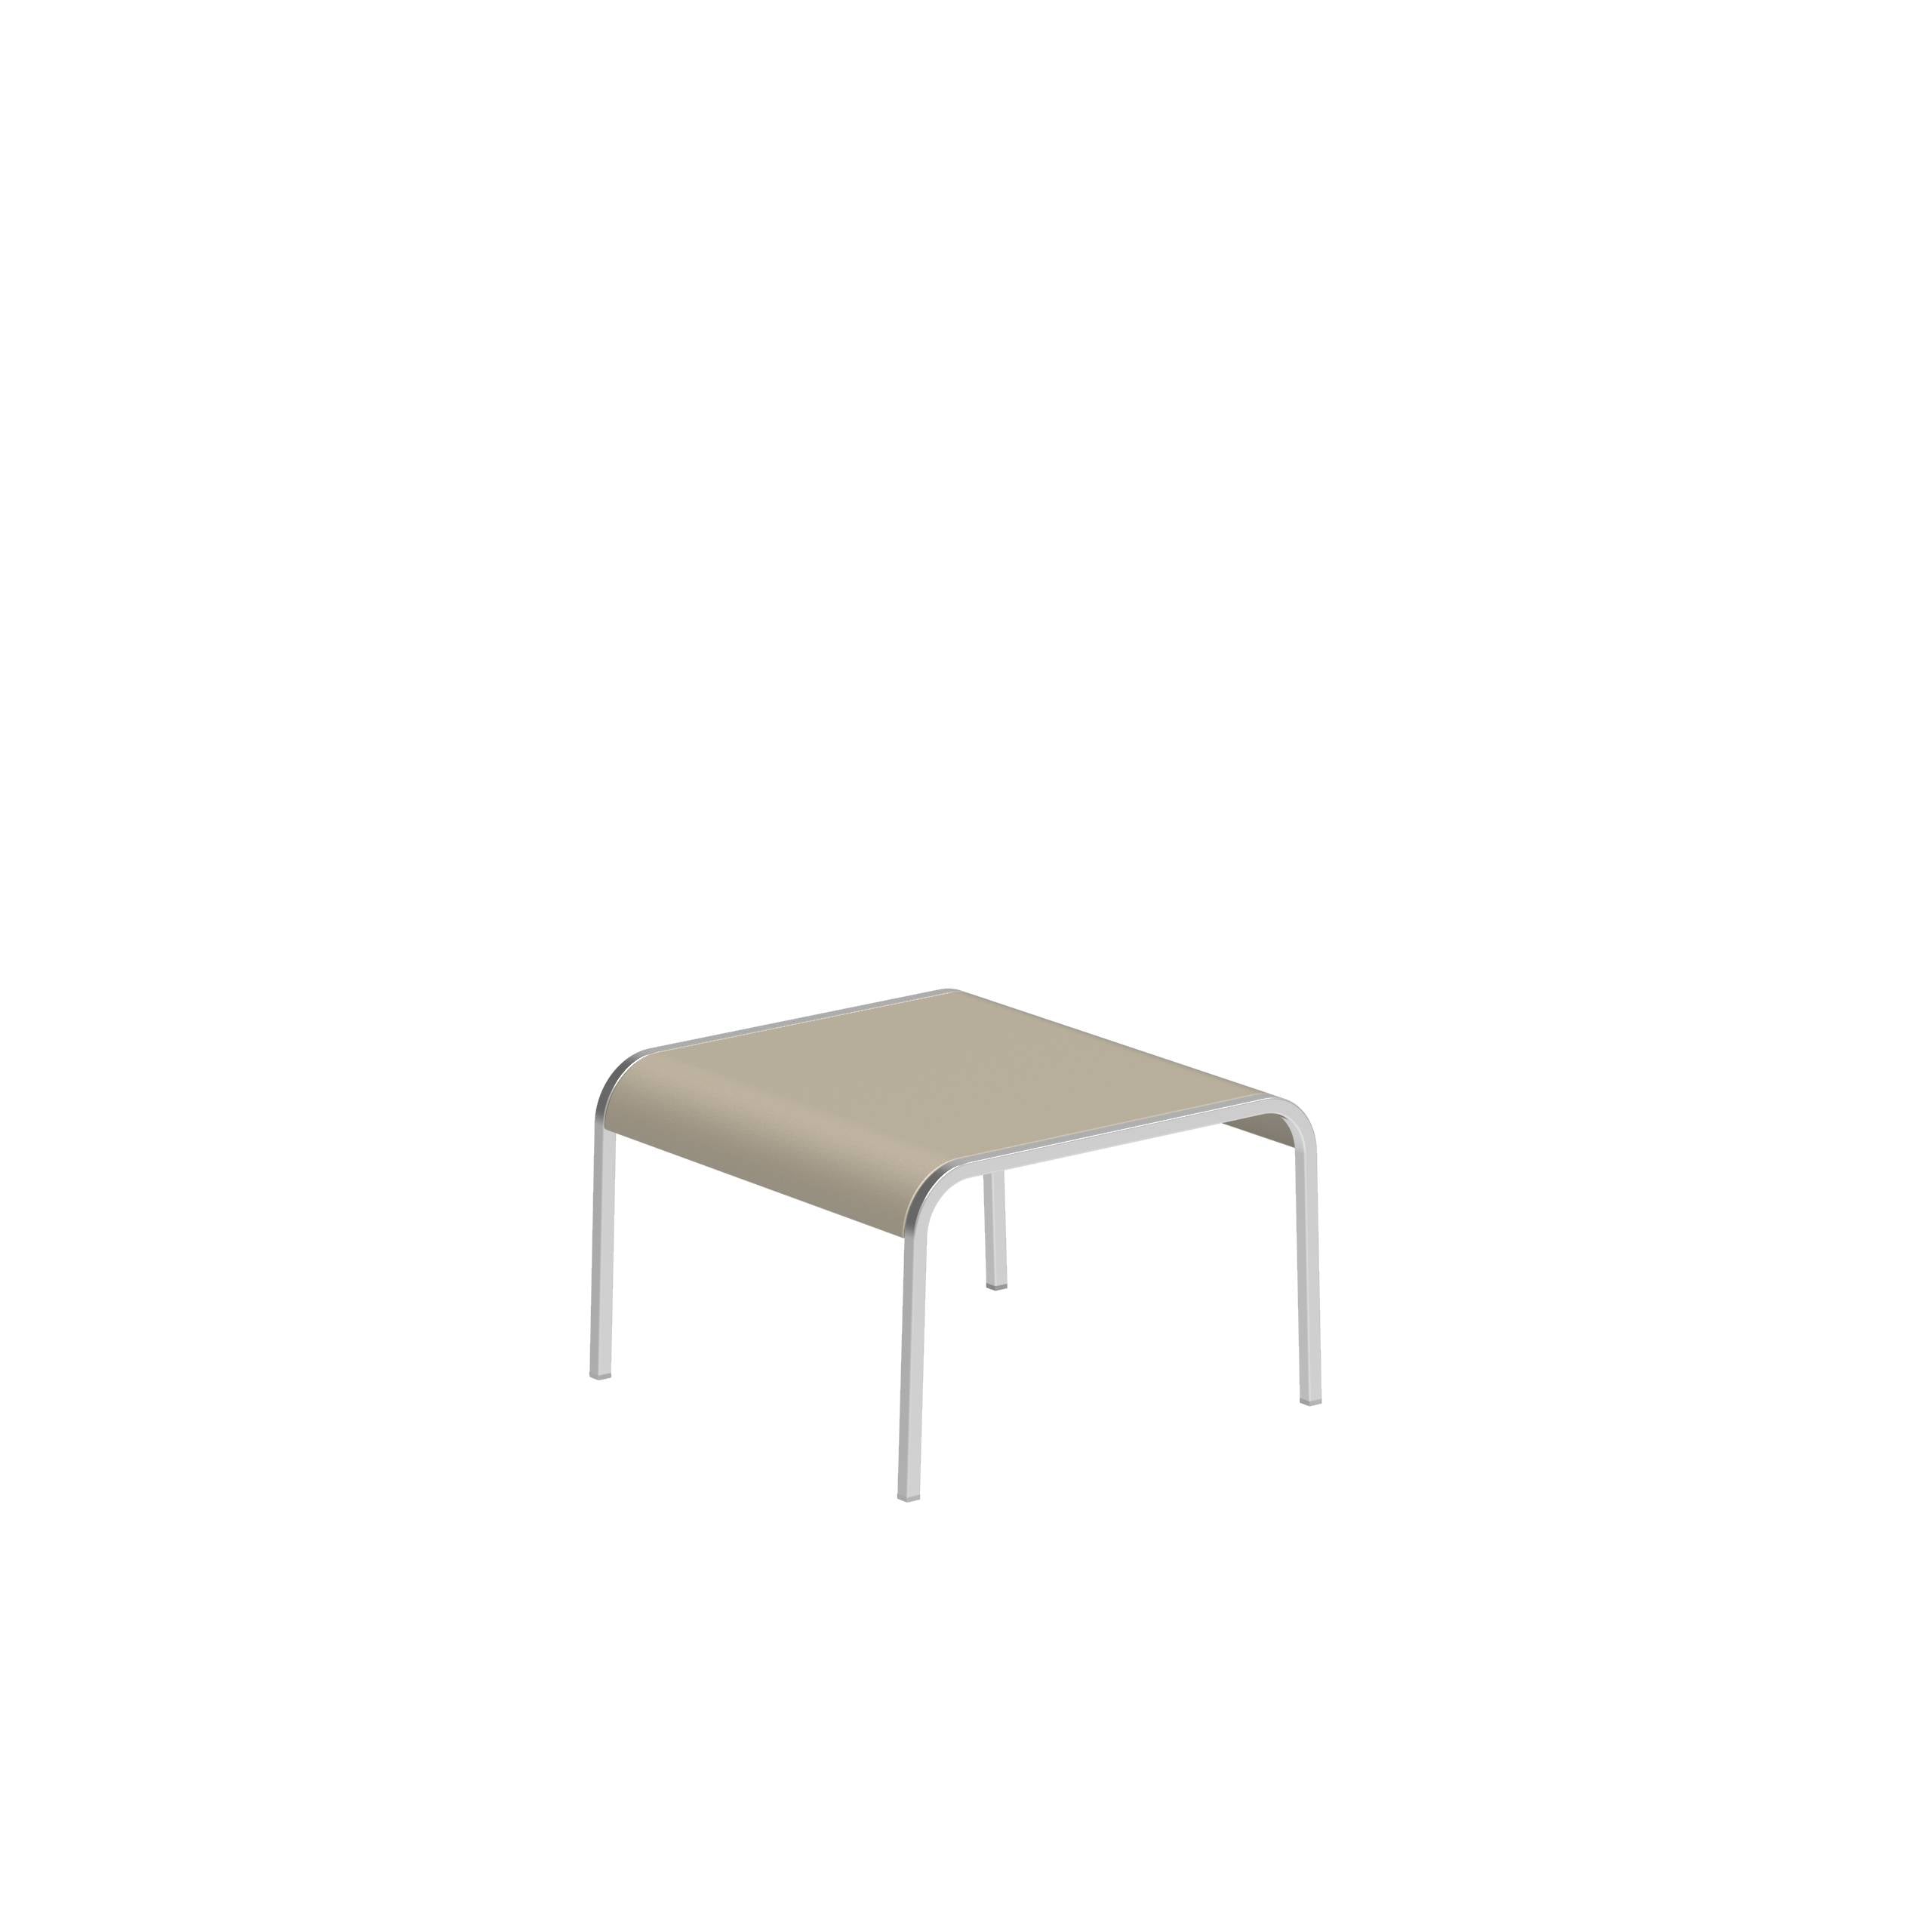 Qt50 Side Table 50x50cm With Alu Top Sand El Pol